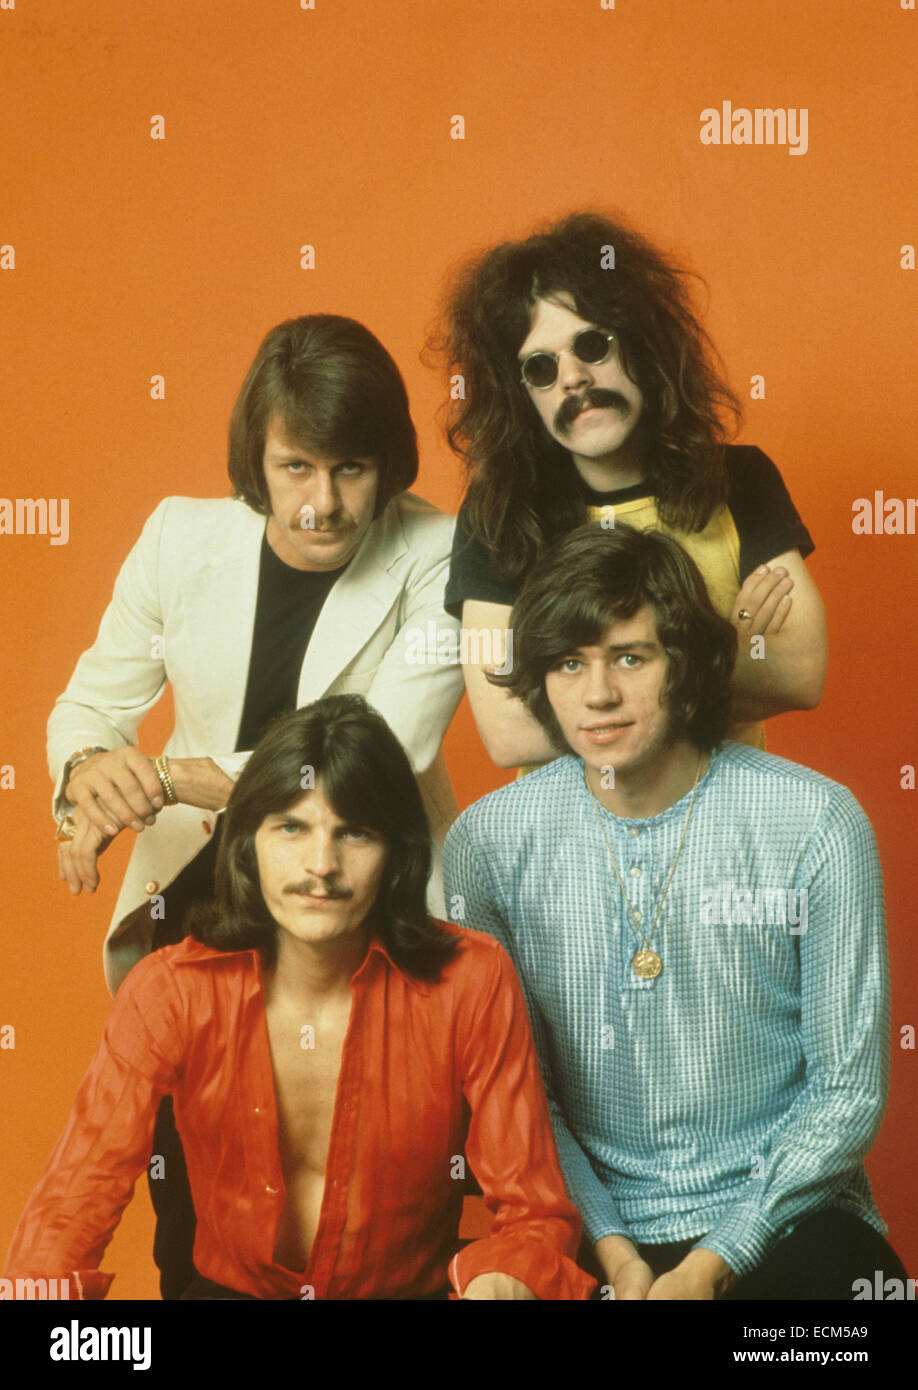 THE MOVE UK pop group about 1970. Clockwise from top left: Carl Wayne, Roy  Wood, Bev Bevan, Rick Price Stock Photo - Alamy